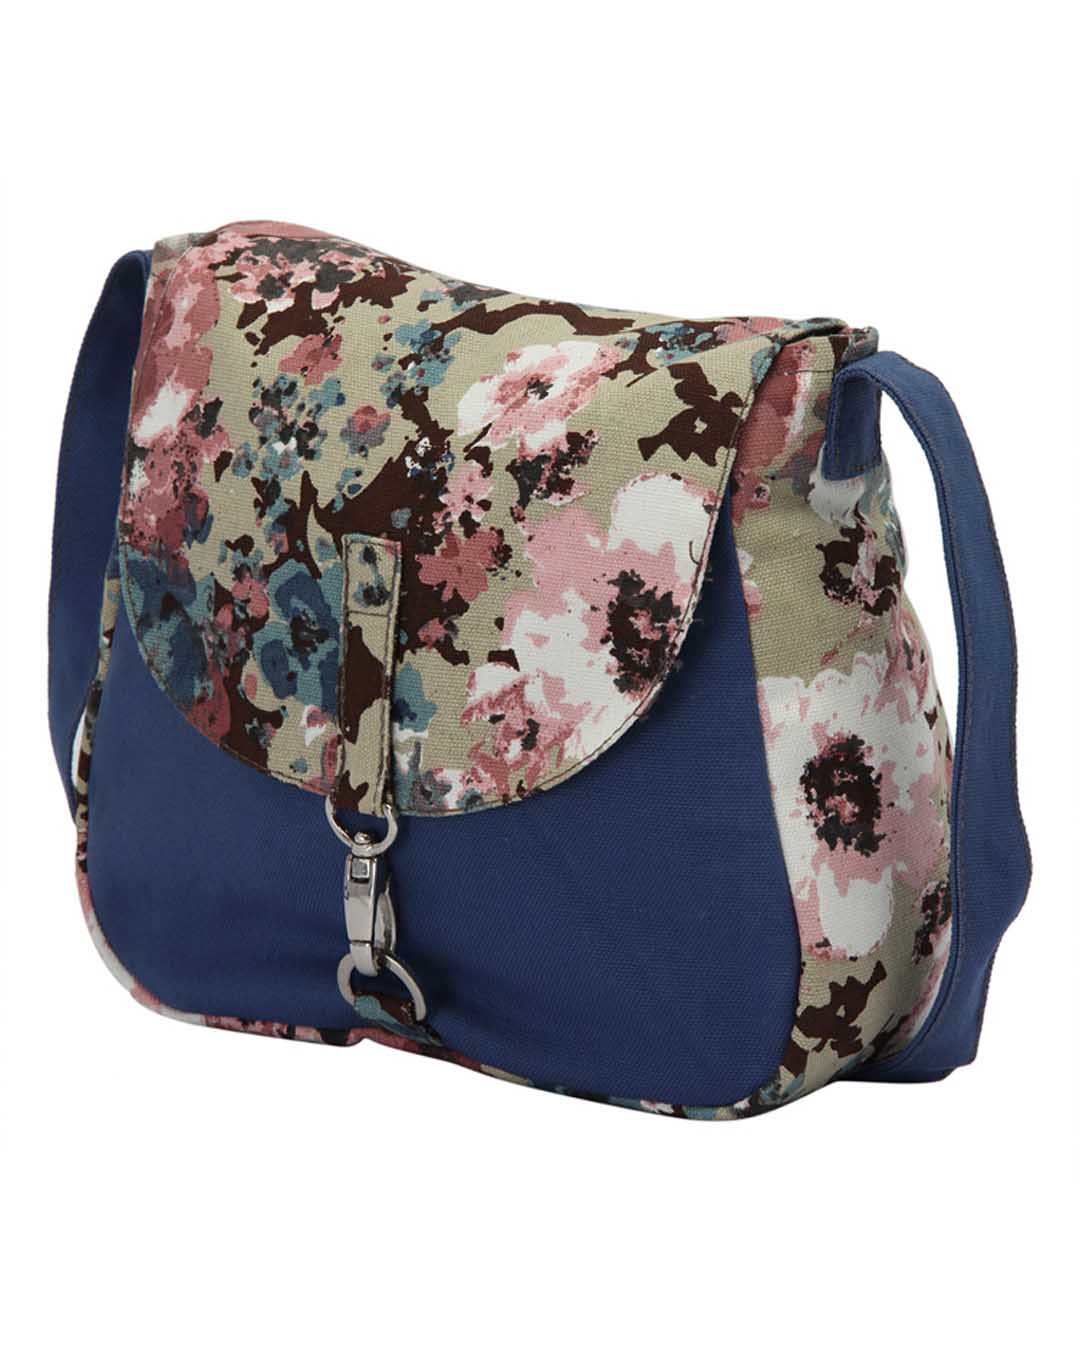 Shop Floral Flap Printed Canvas Cross Body-Back